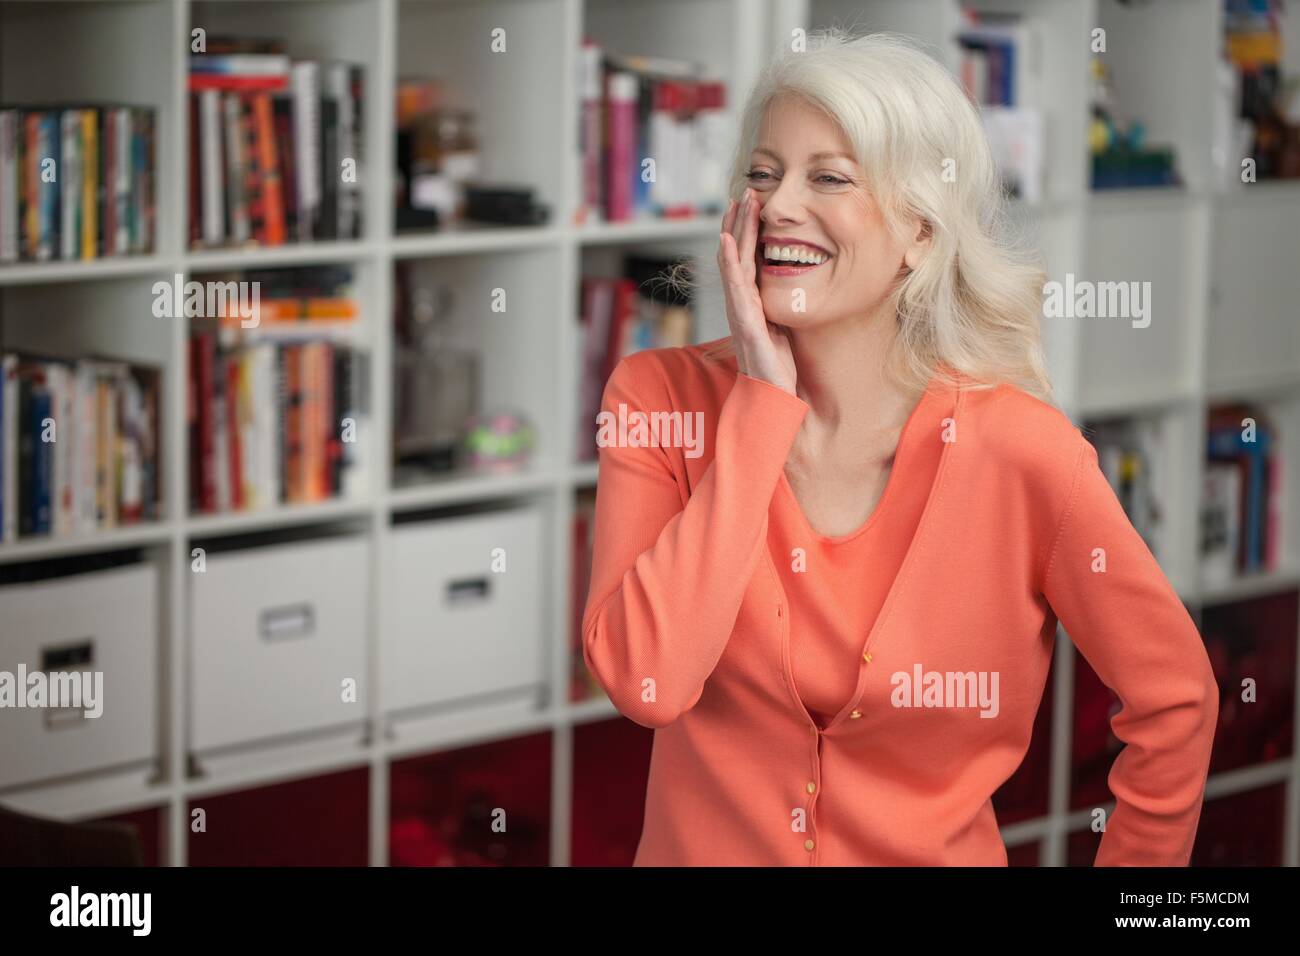 Portrait of mature woman, laughing, indoors Stock Photo